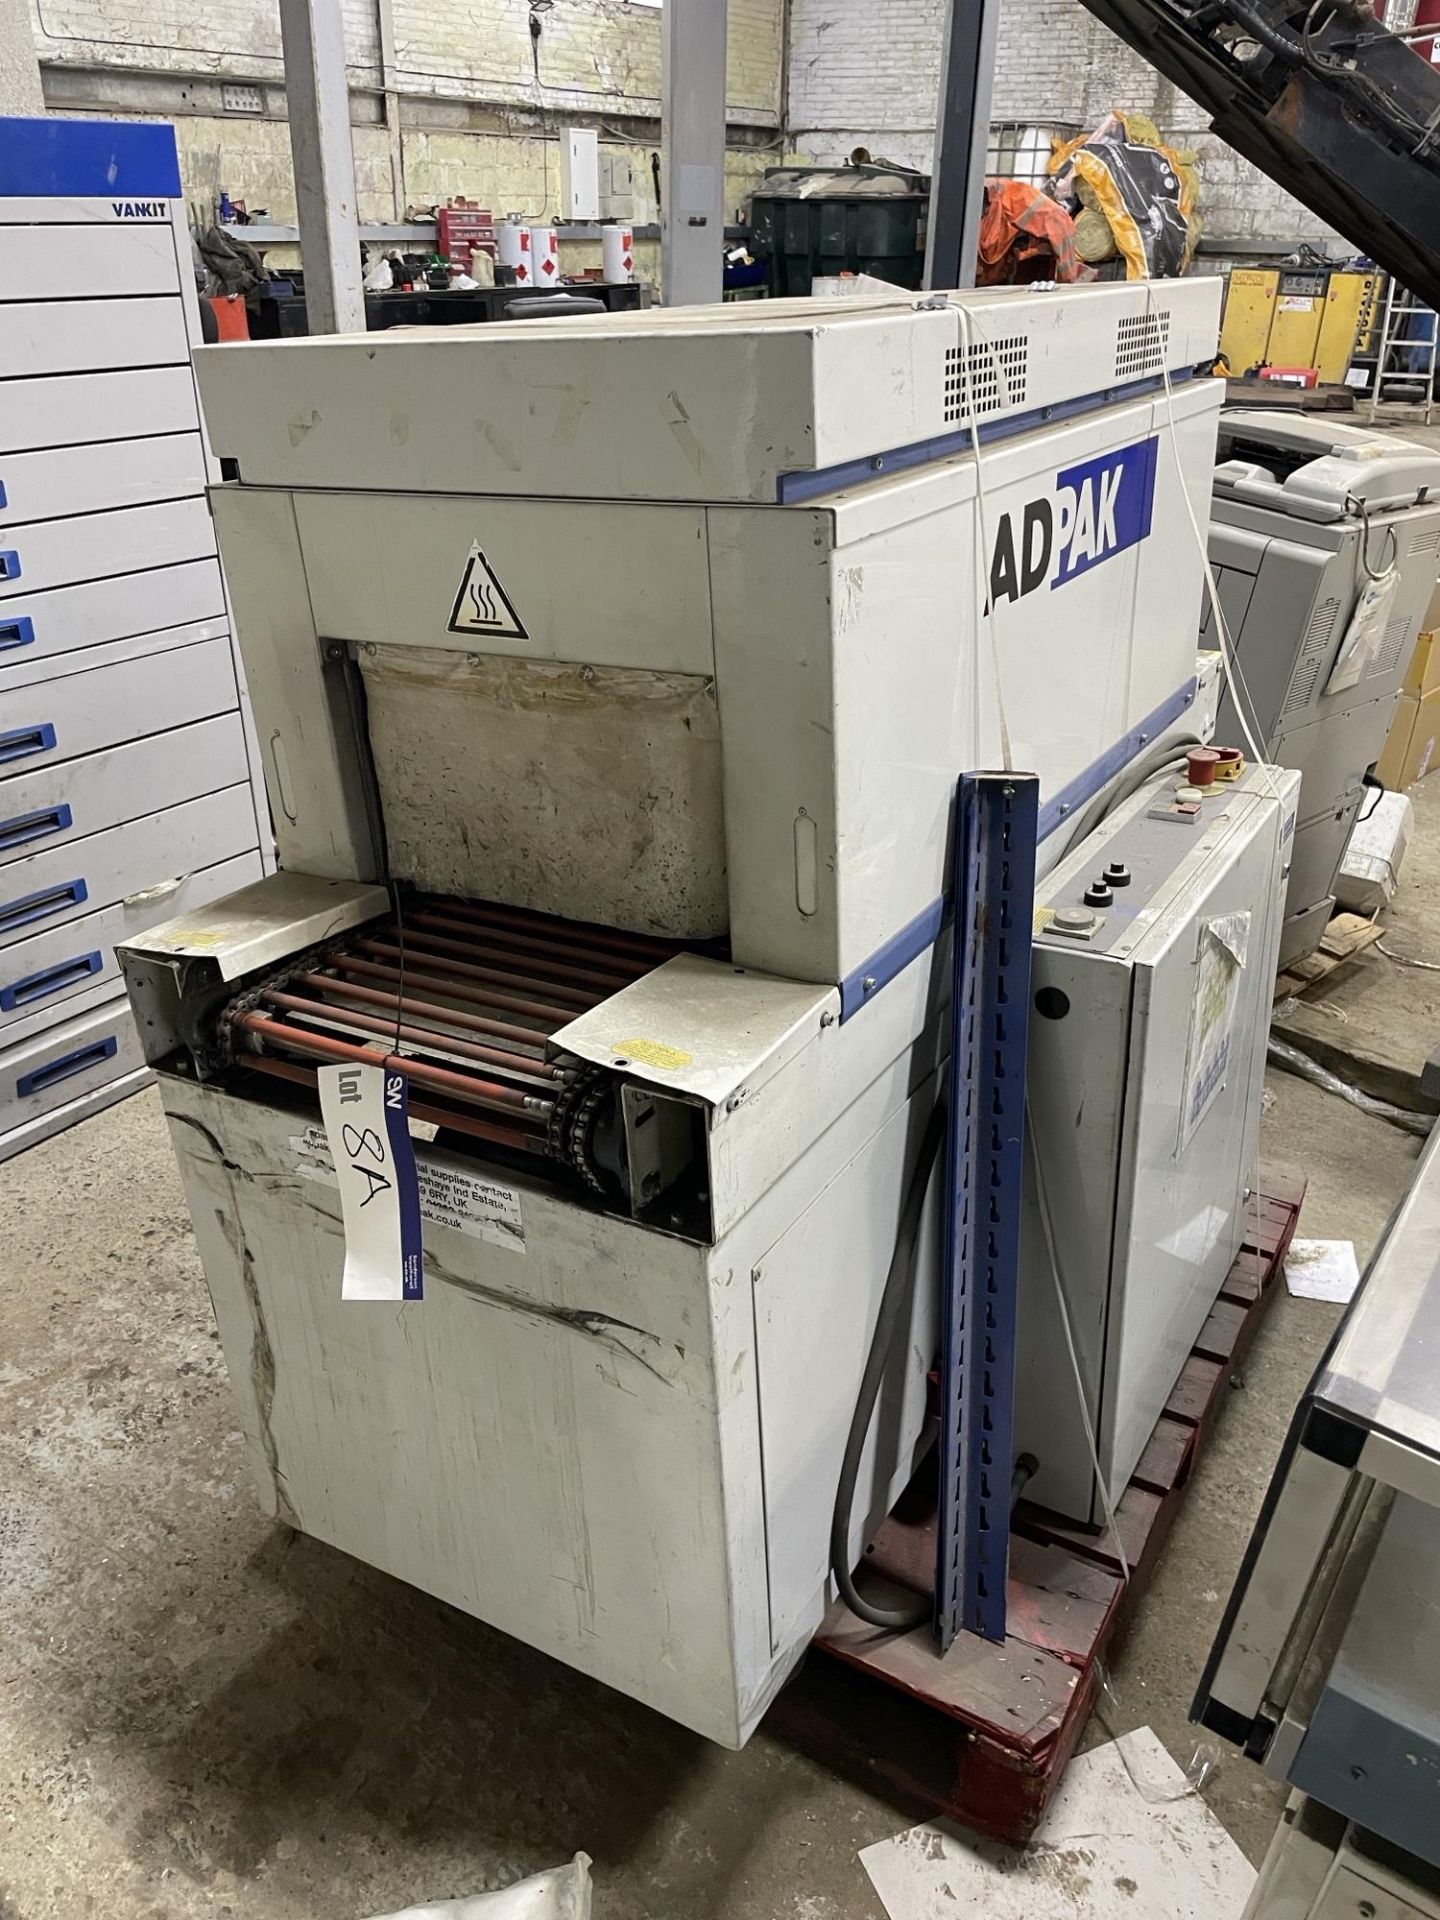 Adpak TR 420 L Mobile Heat Tunnel, serial no. 98020919, year of manufacture 1998, 440V, loading free - Image 4 of 7